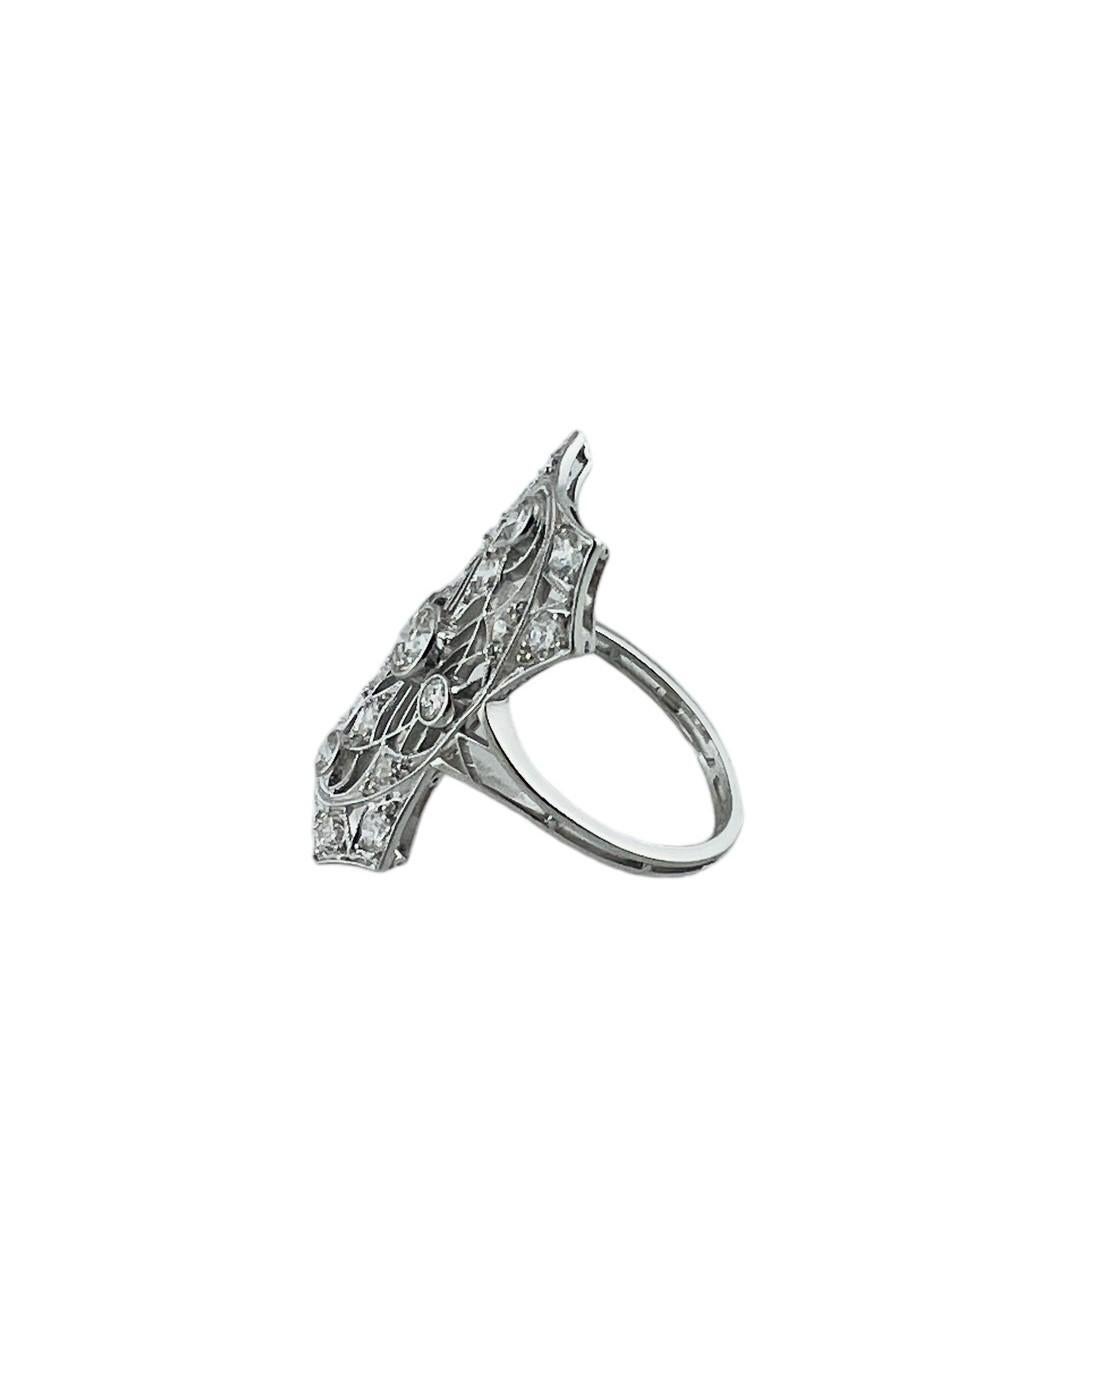 Brilliant Cut Vintage Platinum and Diamond Long Filigree Ring Size 6.5 #16761 For Sale